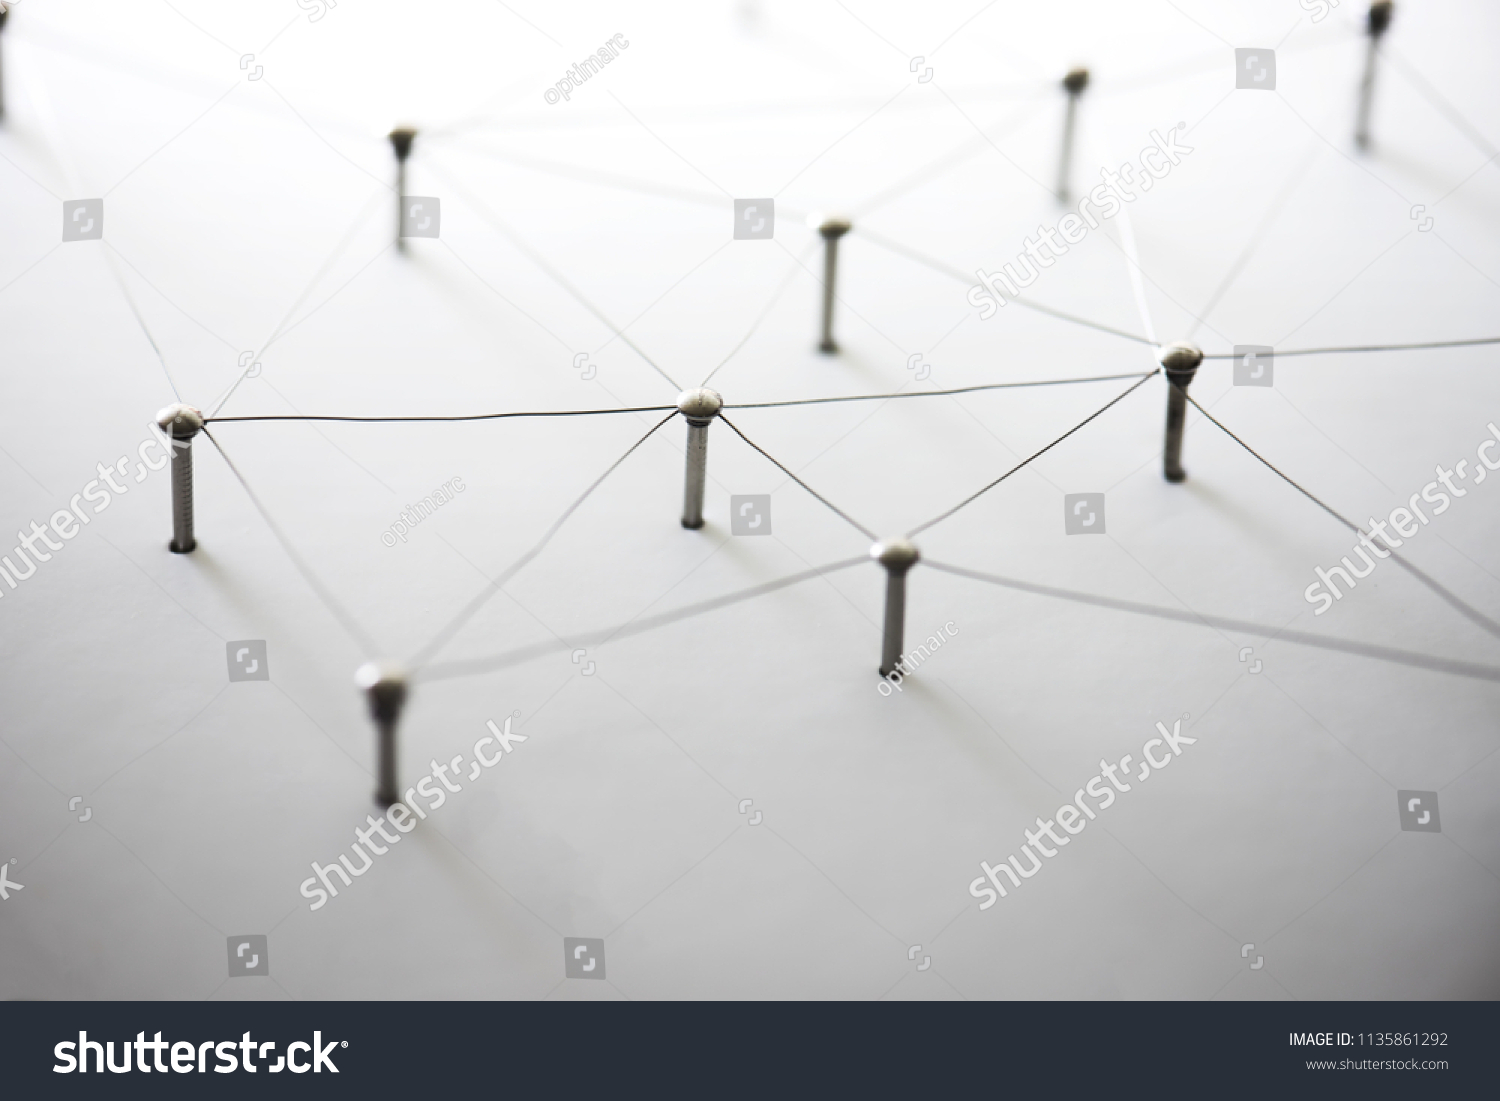 Connecting people and machines. Networking, internet infrastructure communication abstract. Entities of a network connected to each other. Web of thin silver wires on white background. #1135861292